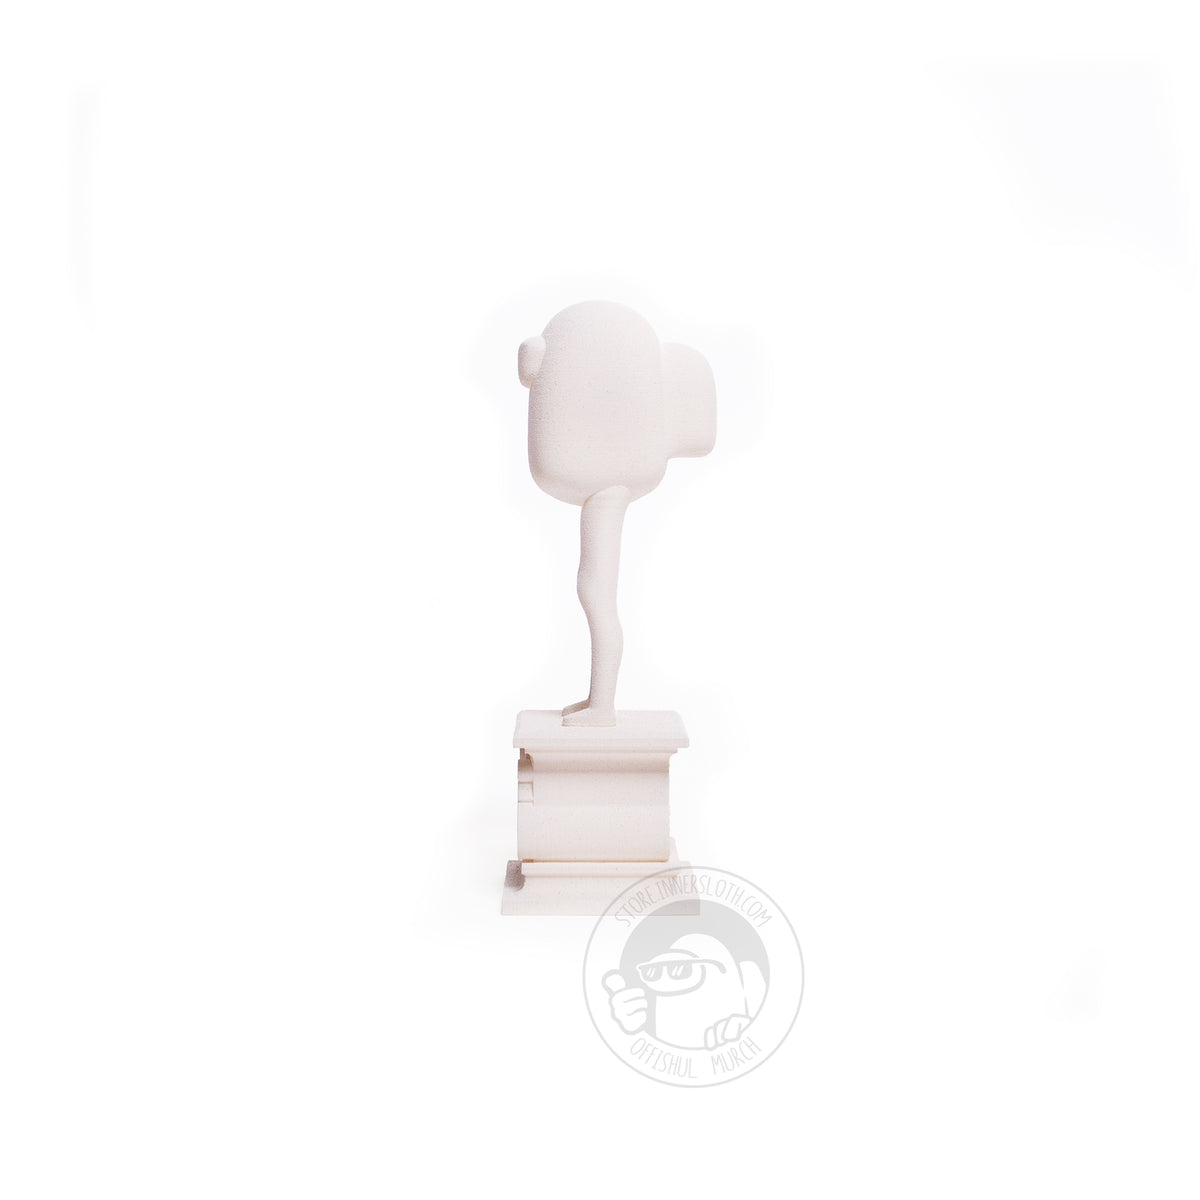 A product photo of the 3D printed Crewmate statue by Garbage Inc. facing left in profile view. From this angle you can see the boxy backpack protruding from its back. 